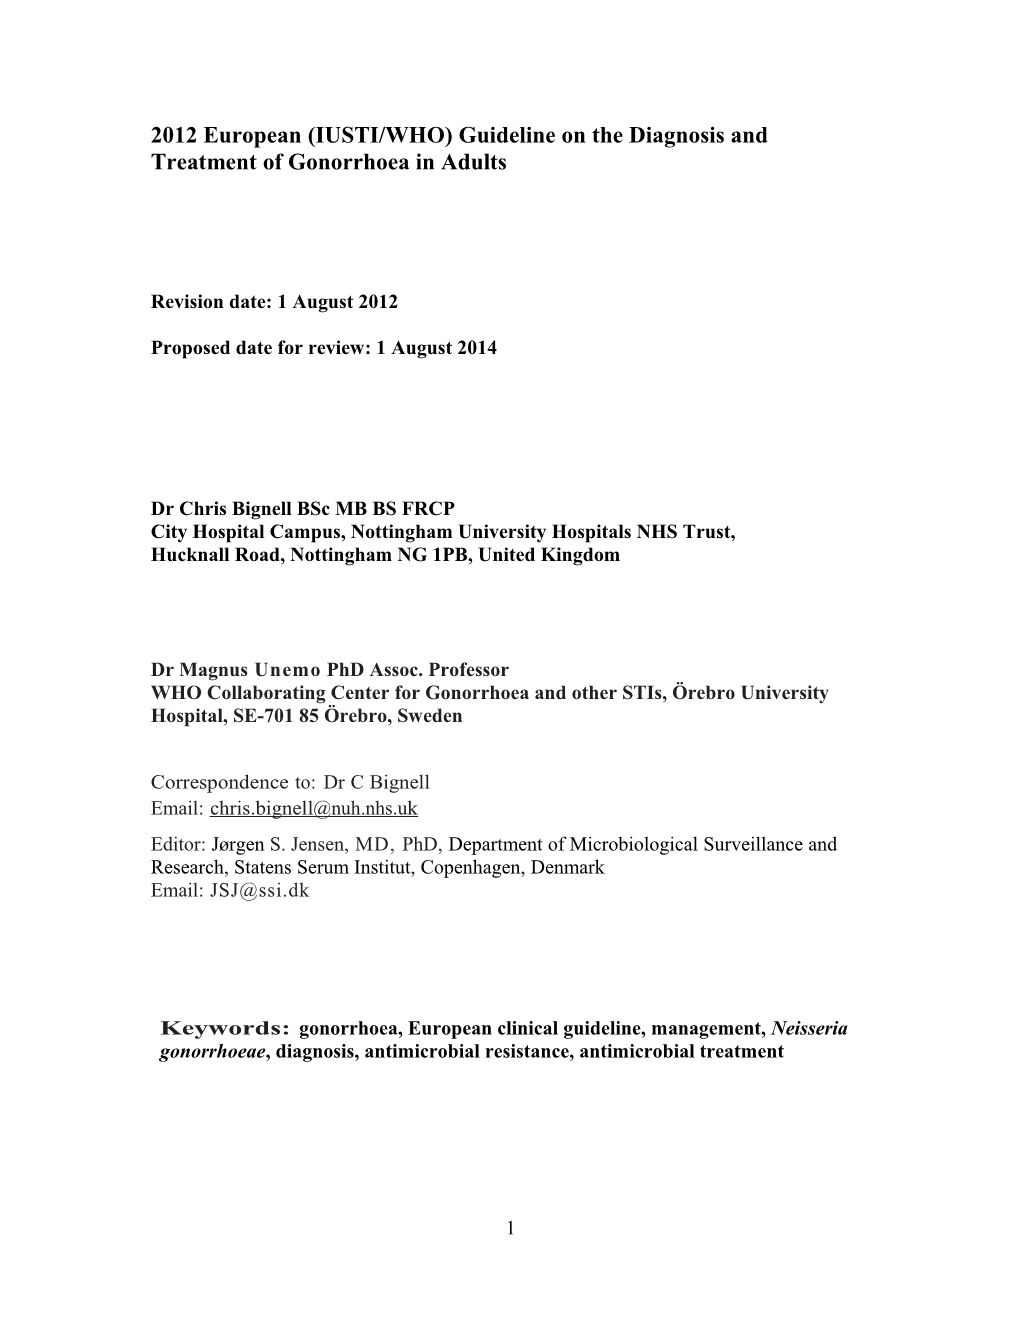 Draft IUSTI/WHO European Guideline on the Diagnosis and Treatment of Gonorrhoea in Adults